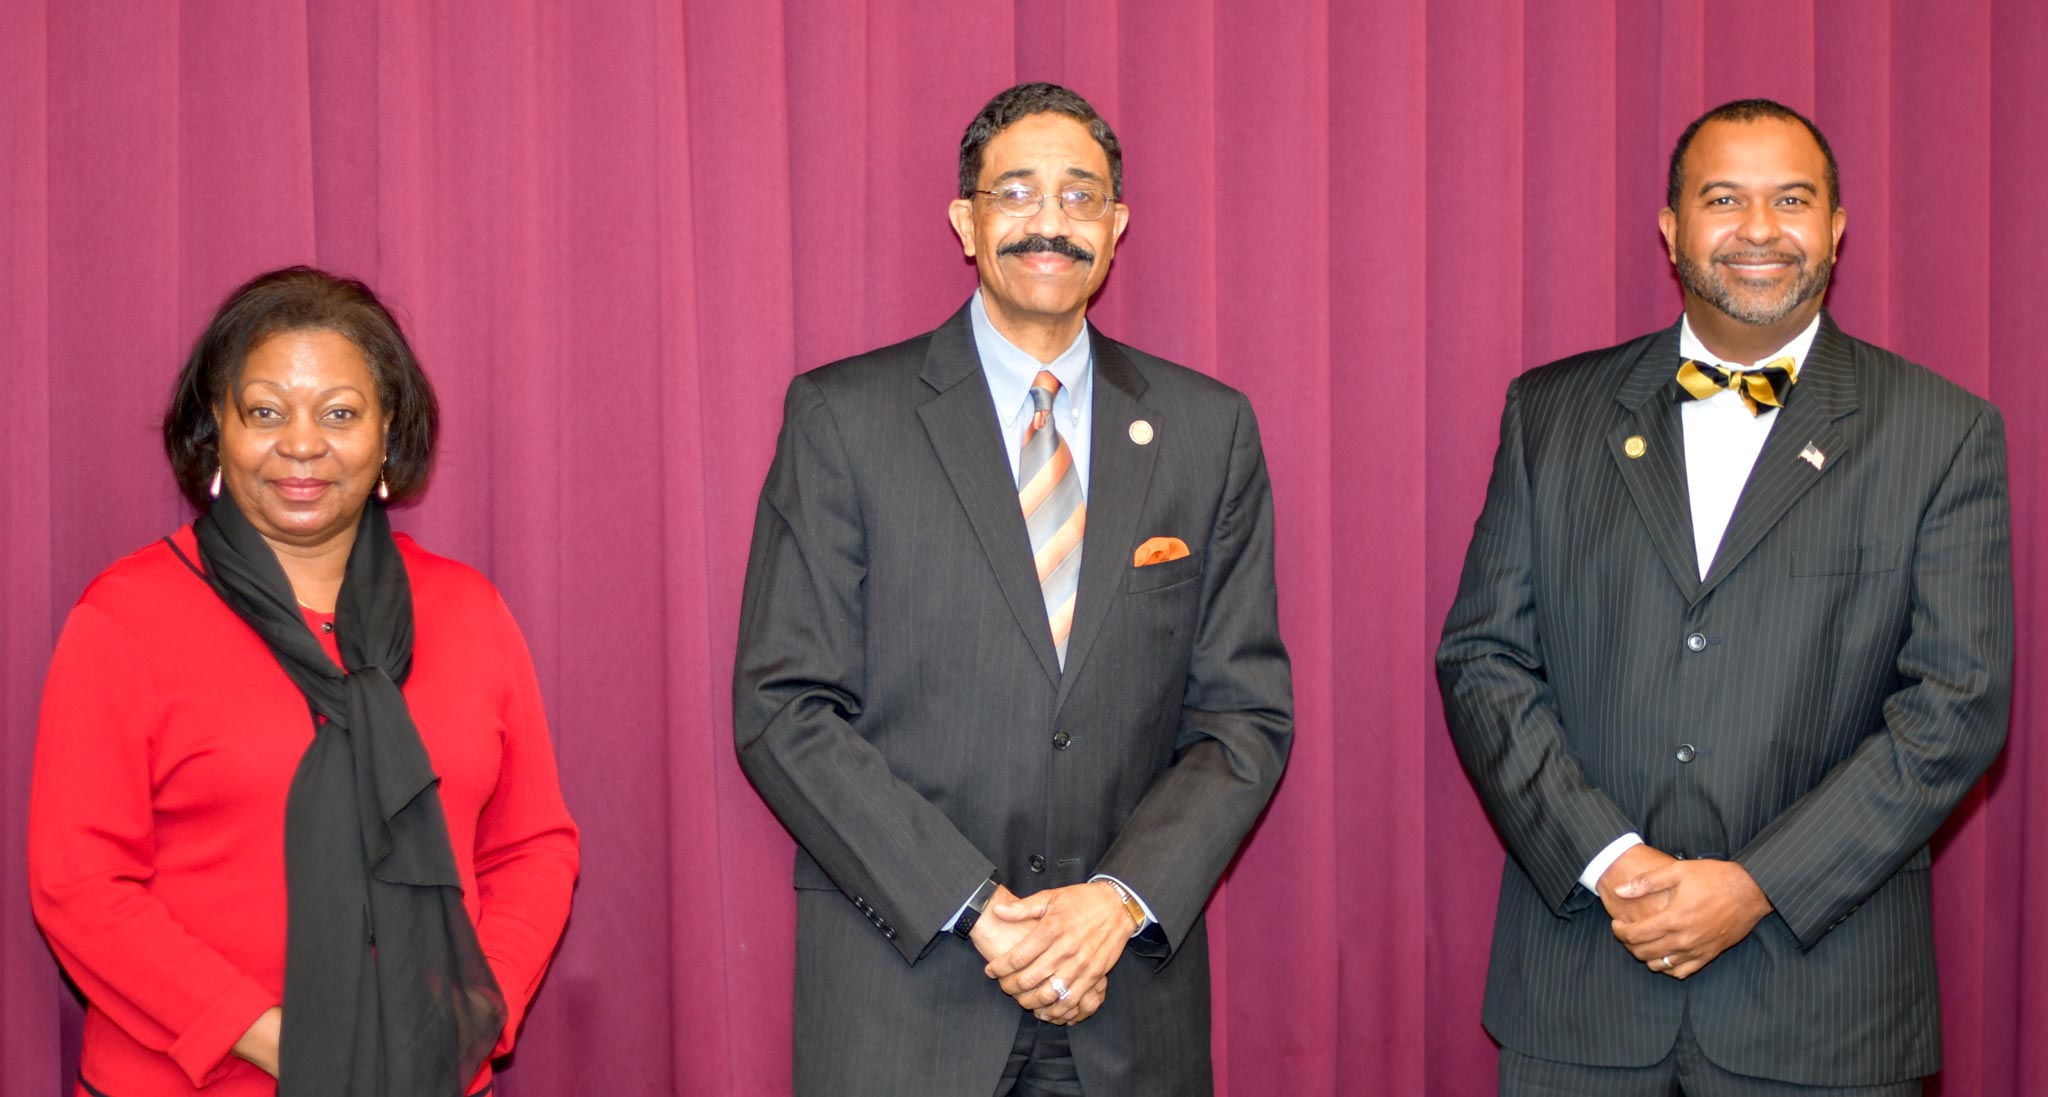 Associate Justice Michael Morgan (center) standing with Judge Wanda Bryant and Judge Fred Gore